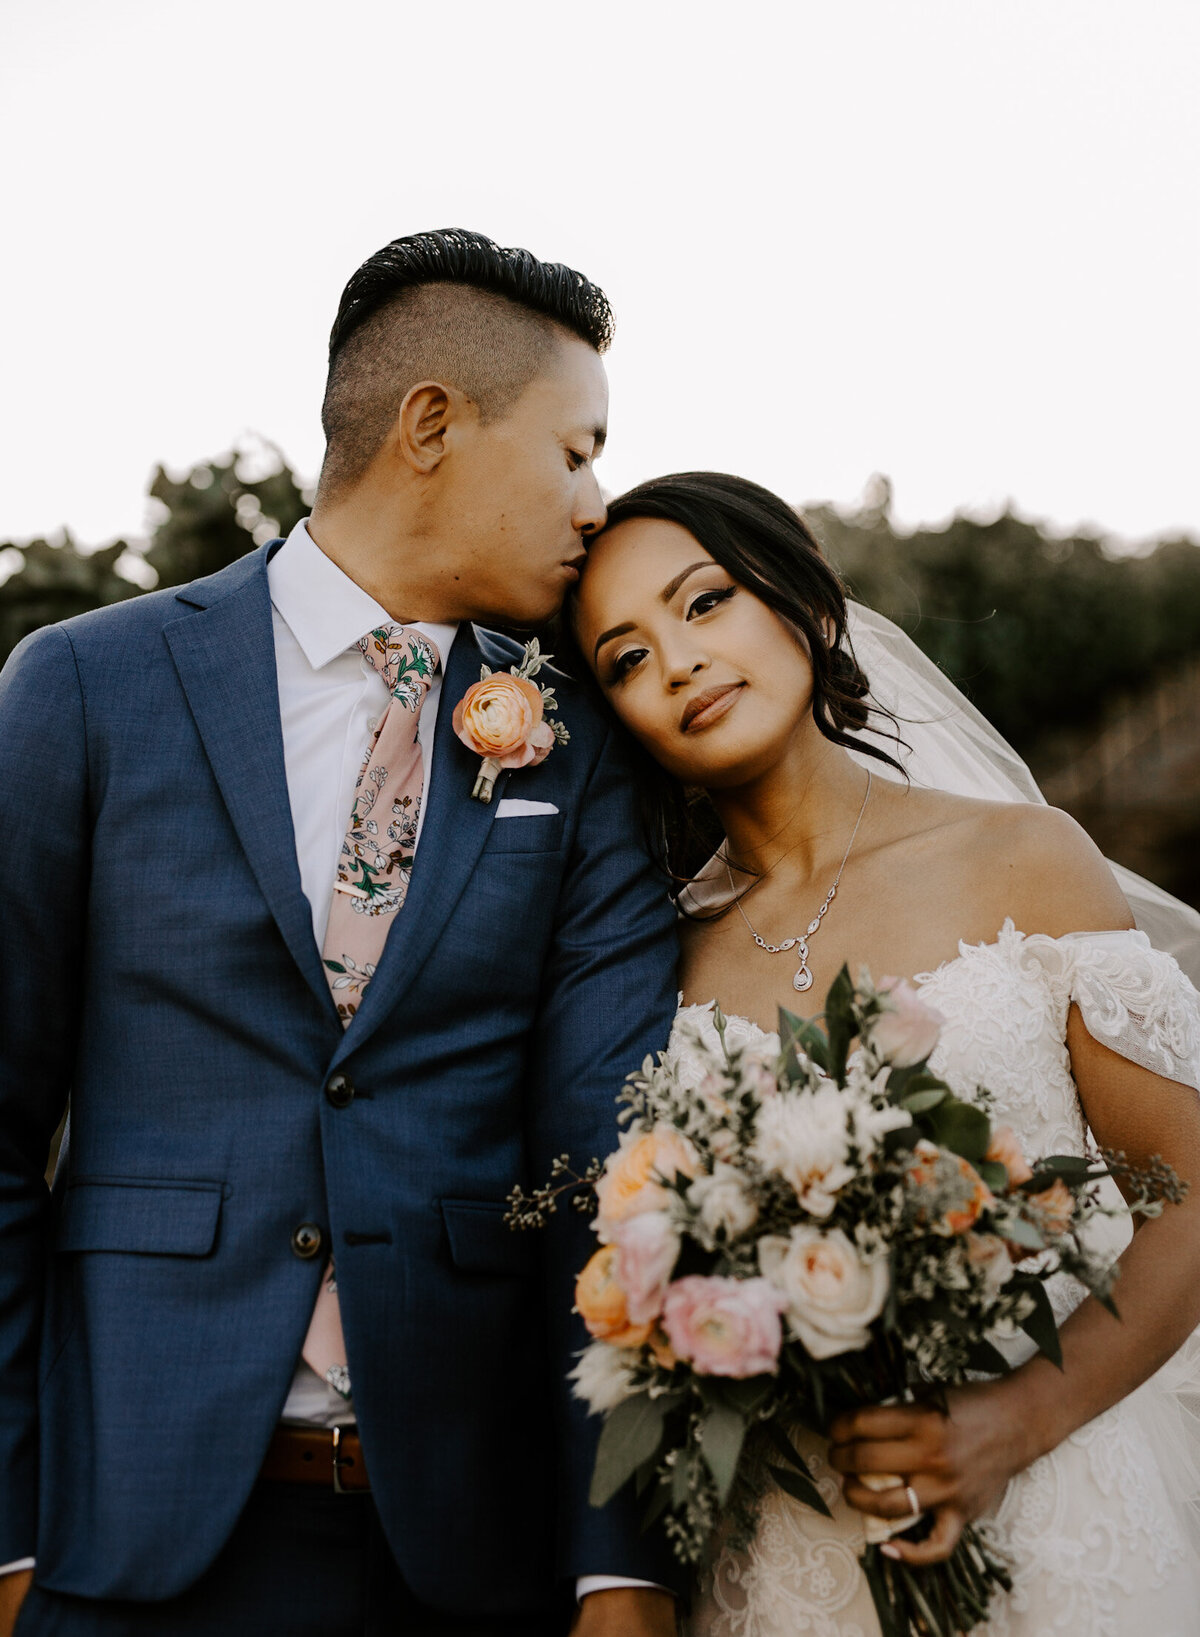 Groom kisses his brides head while holding a bouquet of wedding flowers